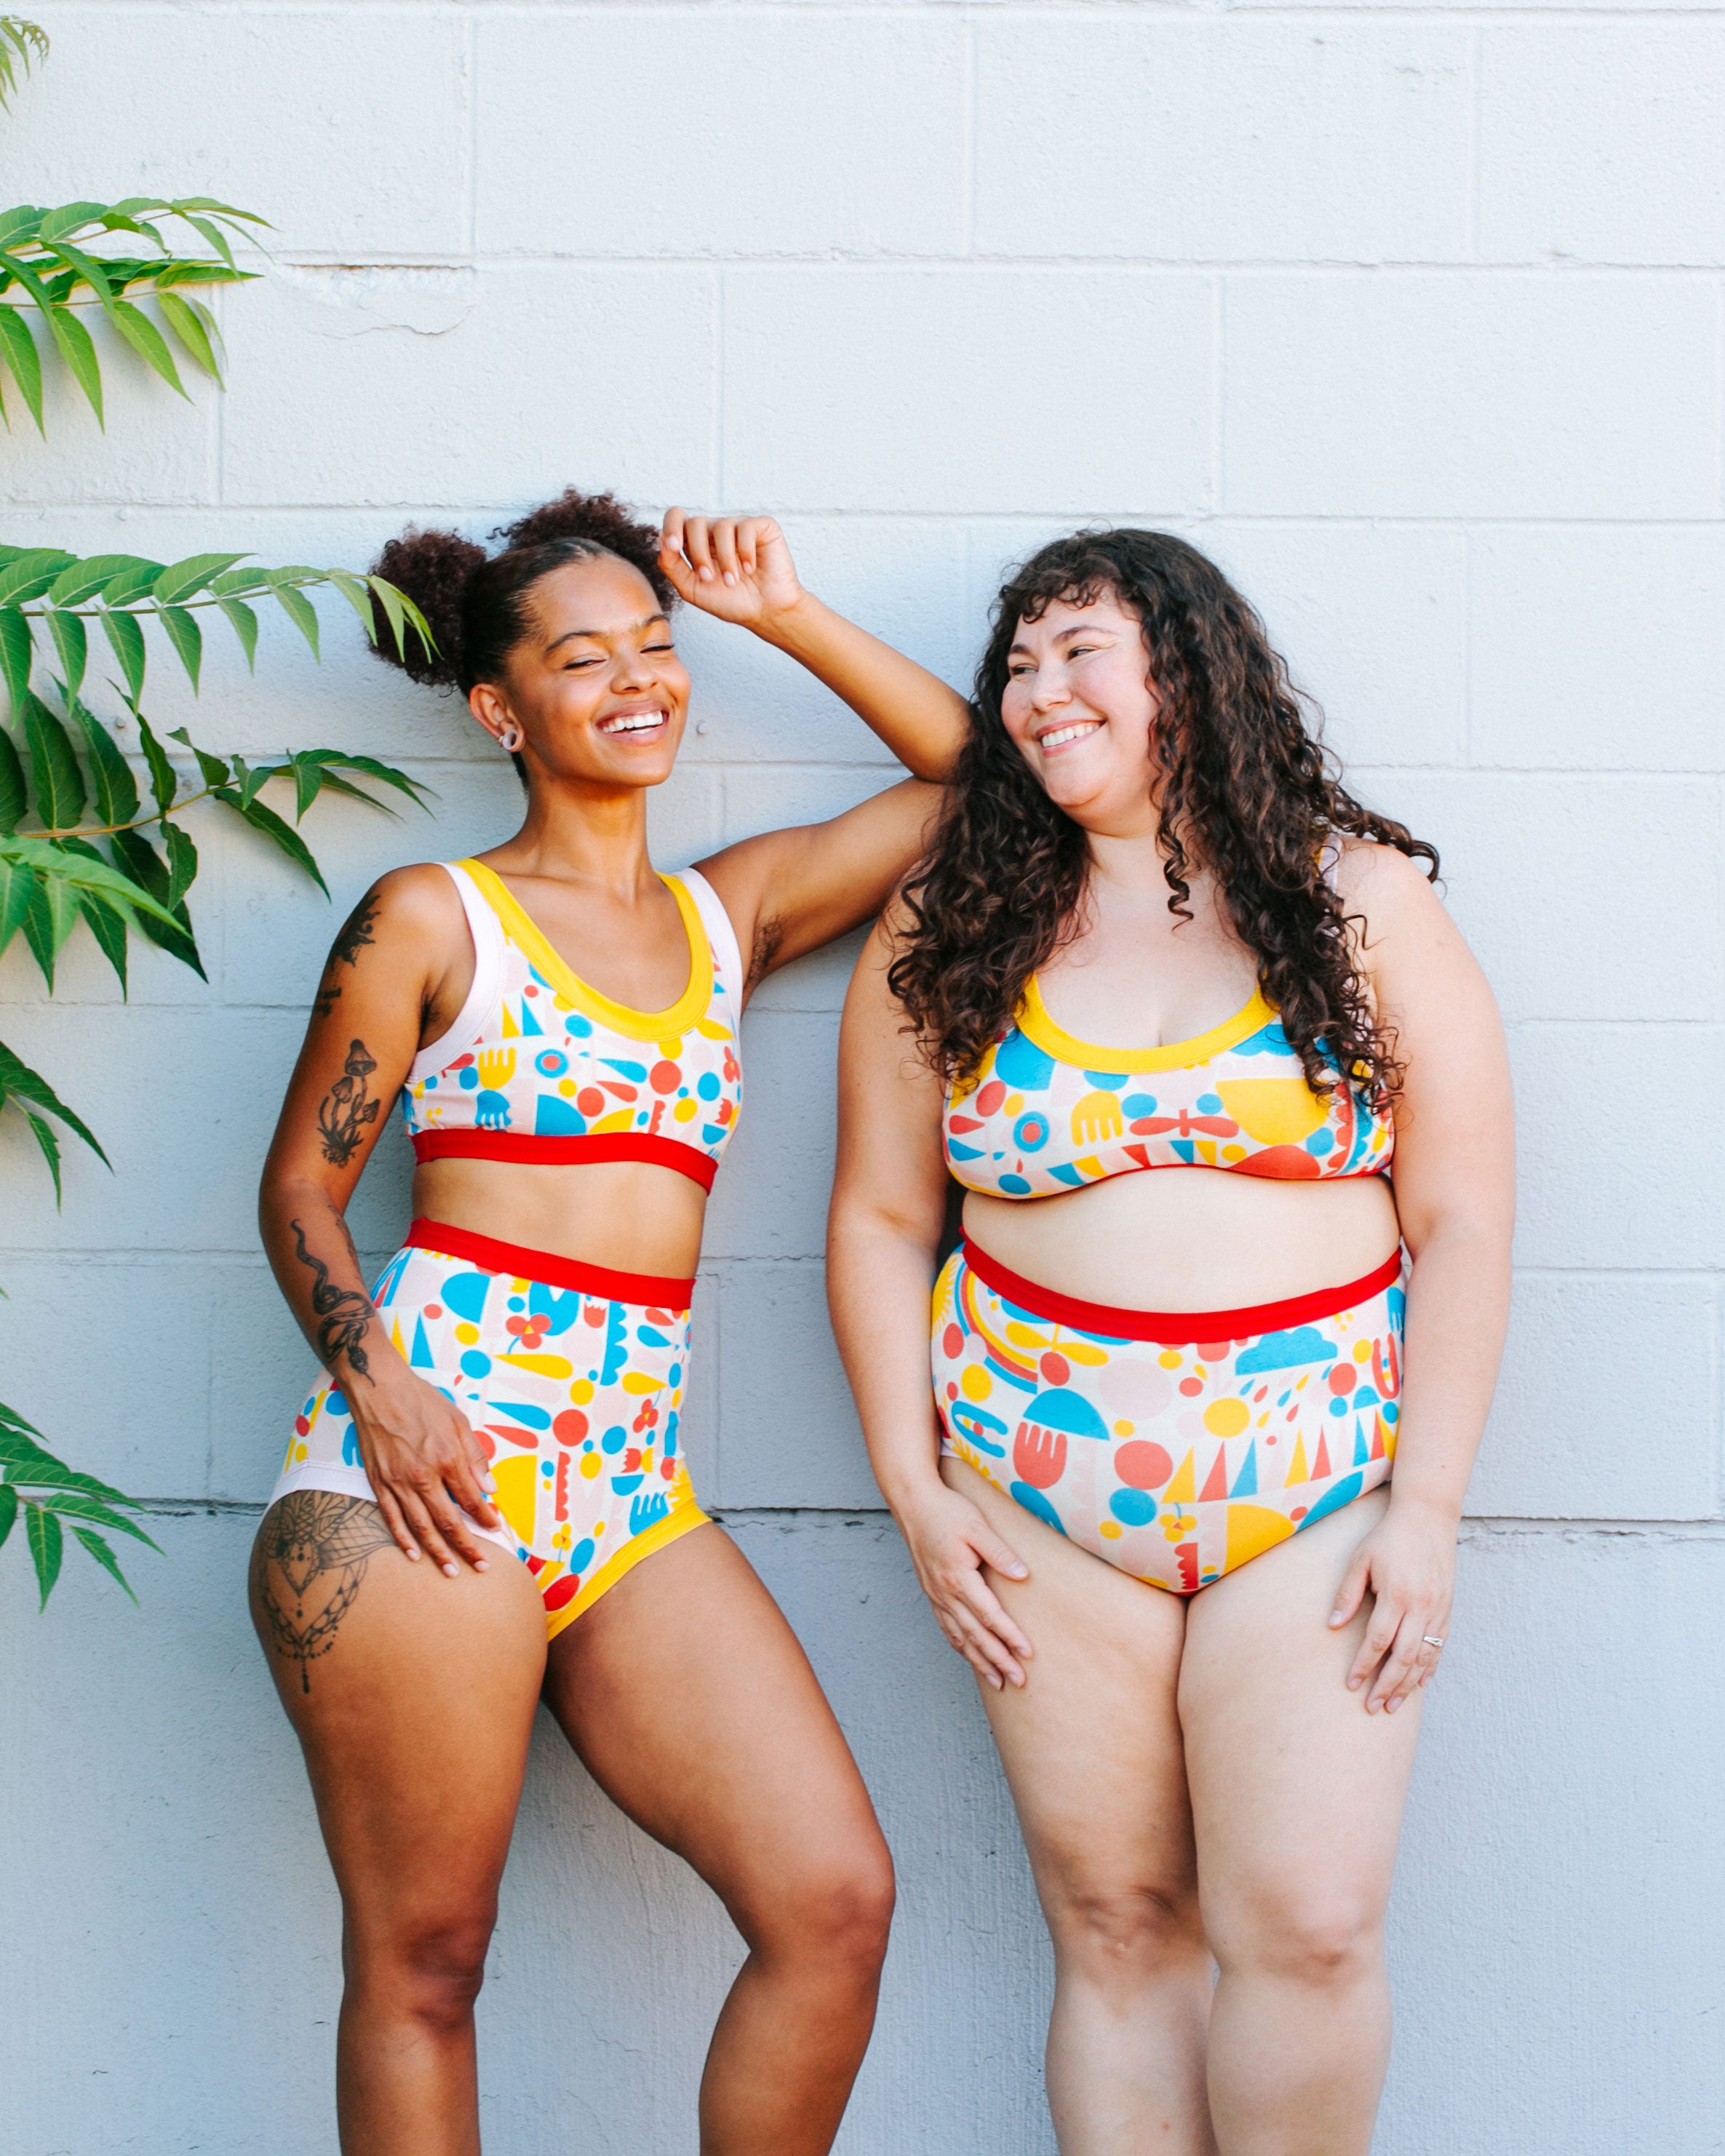 Two models laughing together against a white brick wall wearing sets of Sky Rise style and Original style underwear with Bralettes in Balance by Lisa Congdon print: geometric shapes in red, pink, yellow, and blue colors.